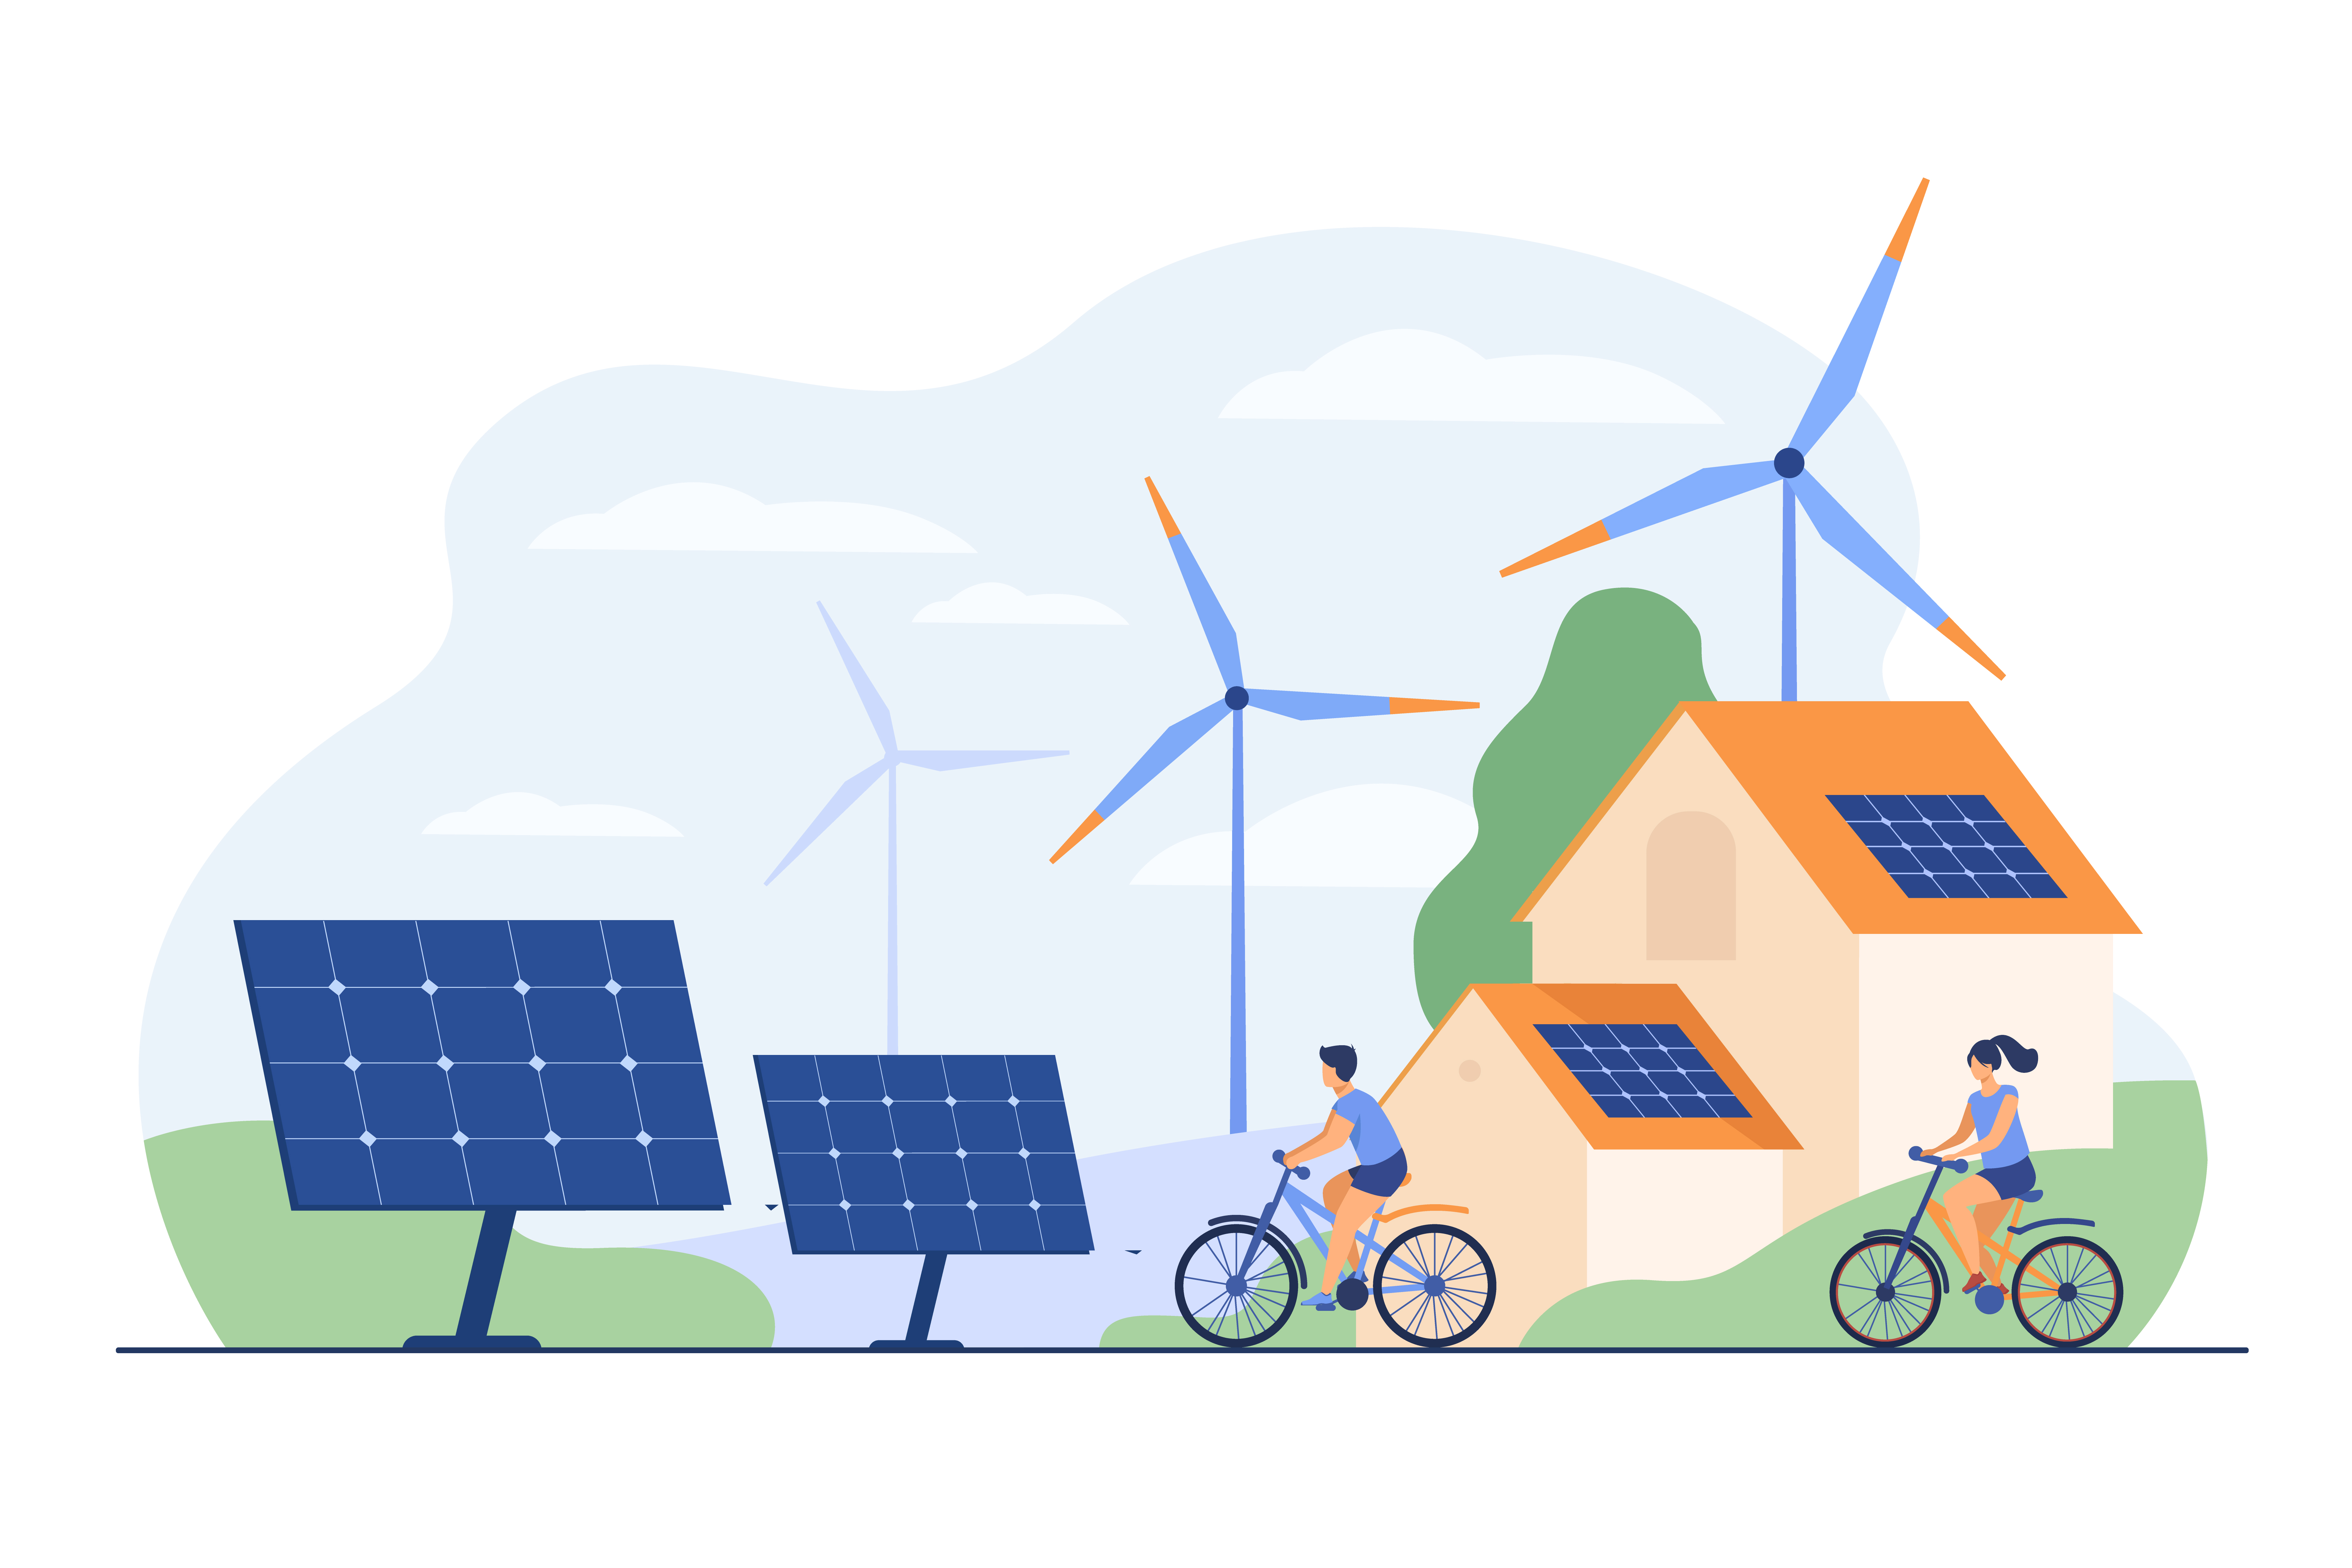 Active people on bikes, windmills and house with solar panel